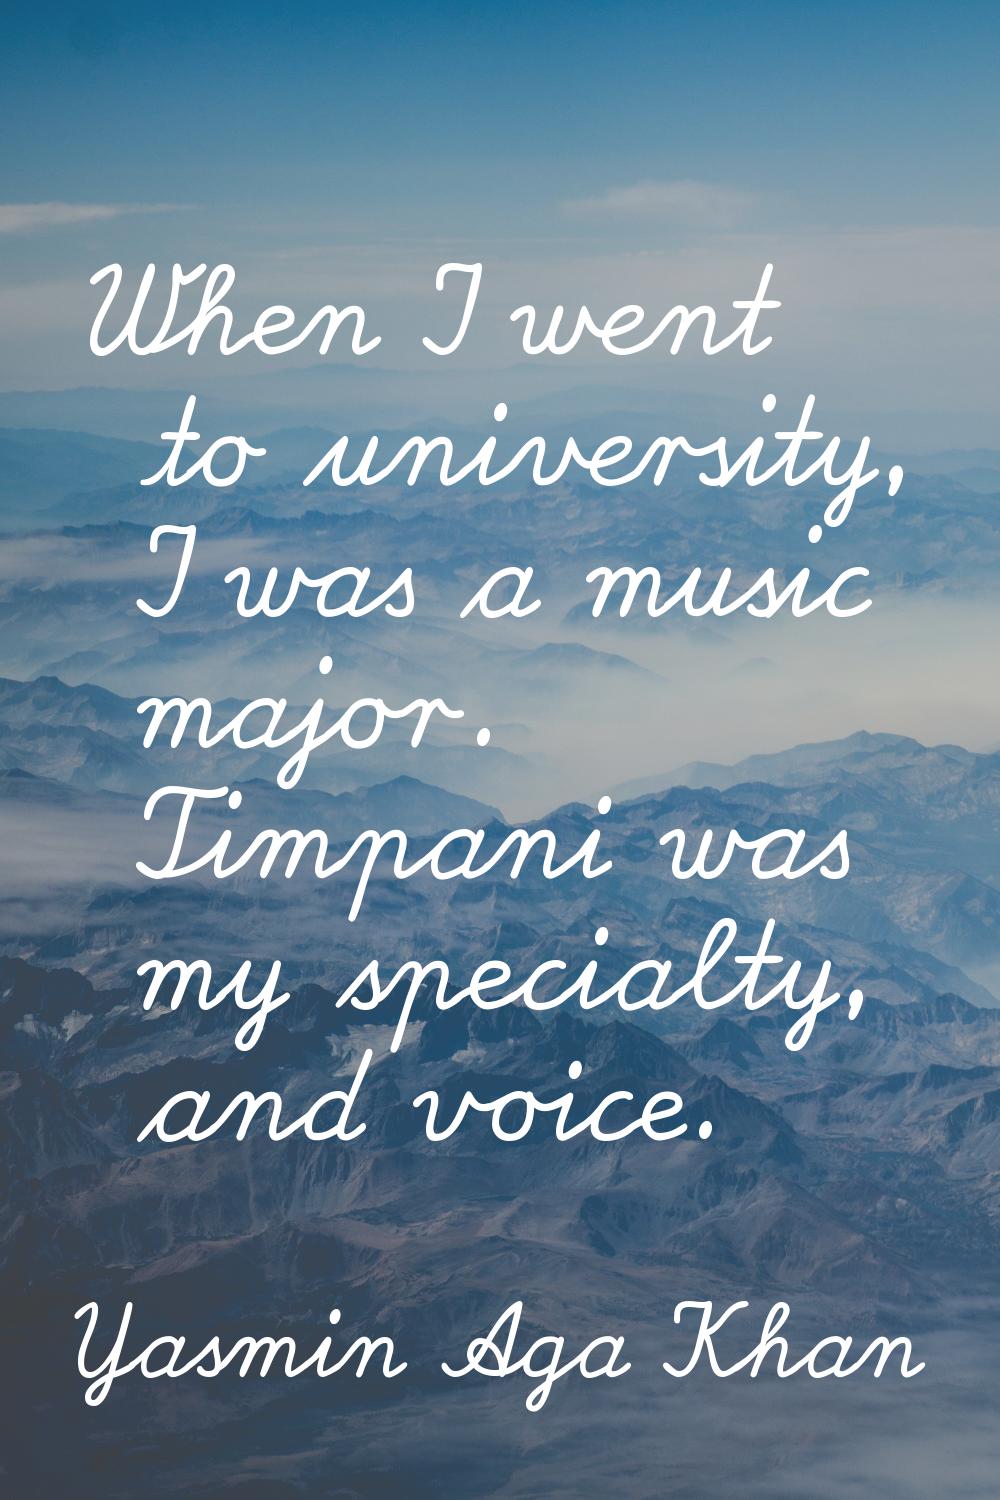 When I went to university, I was a music major. Timpani was my specialty, and voice.